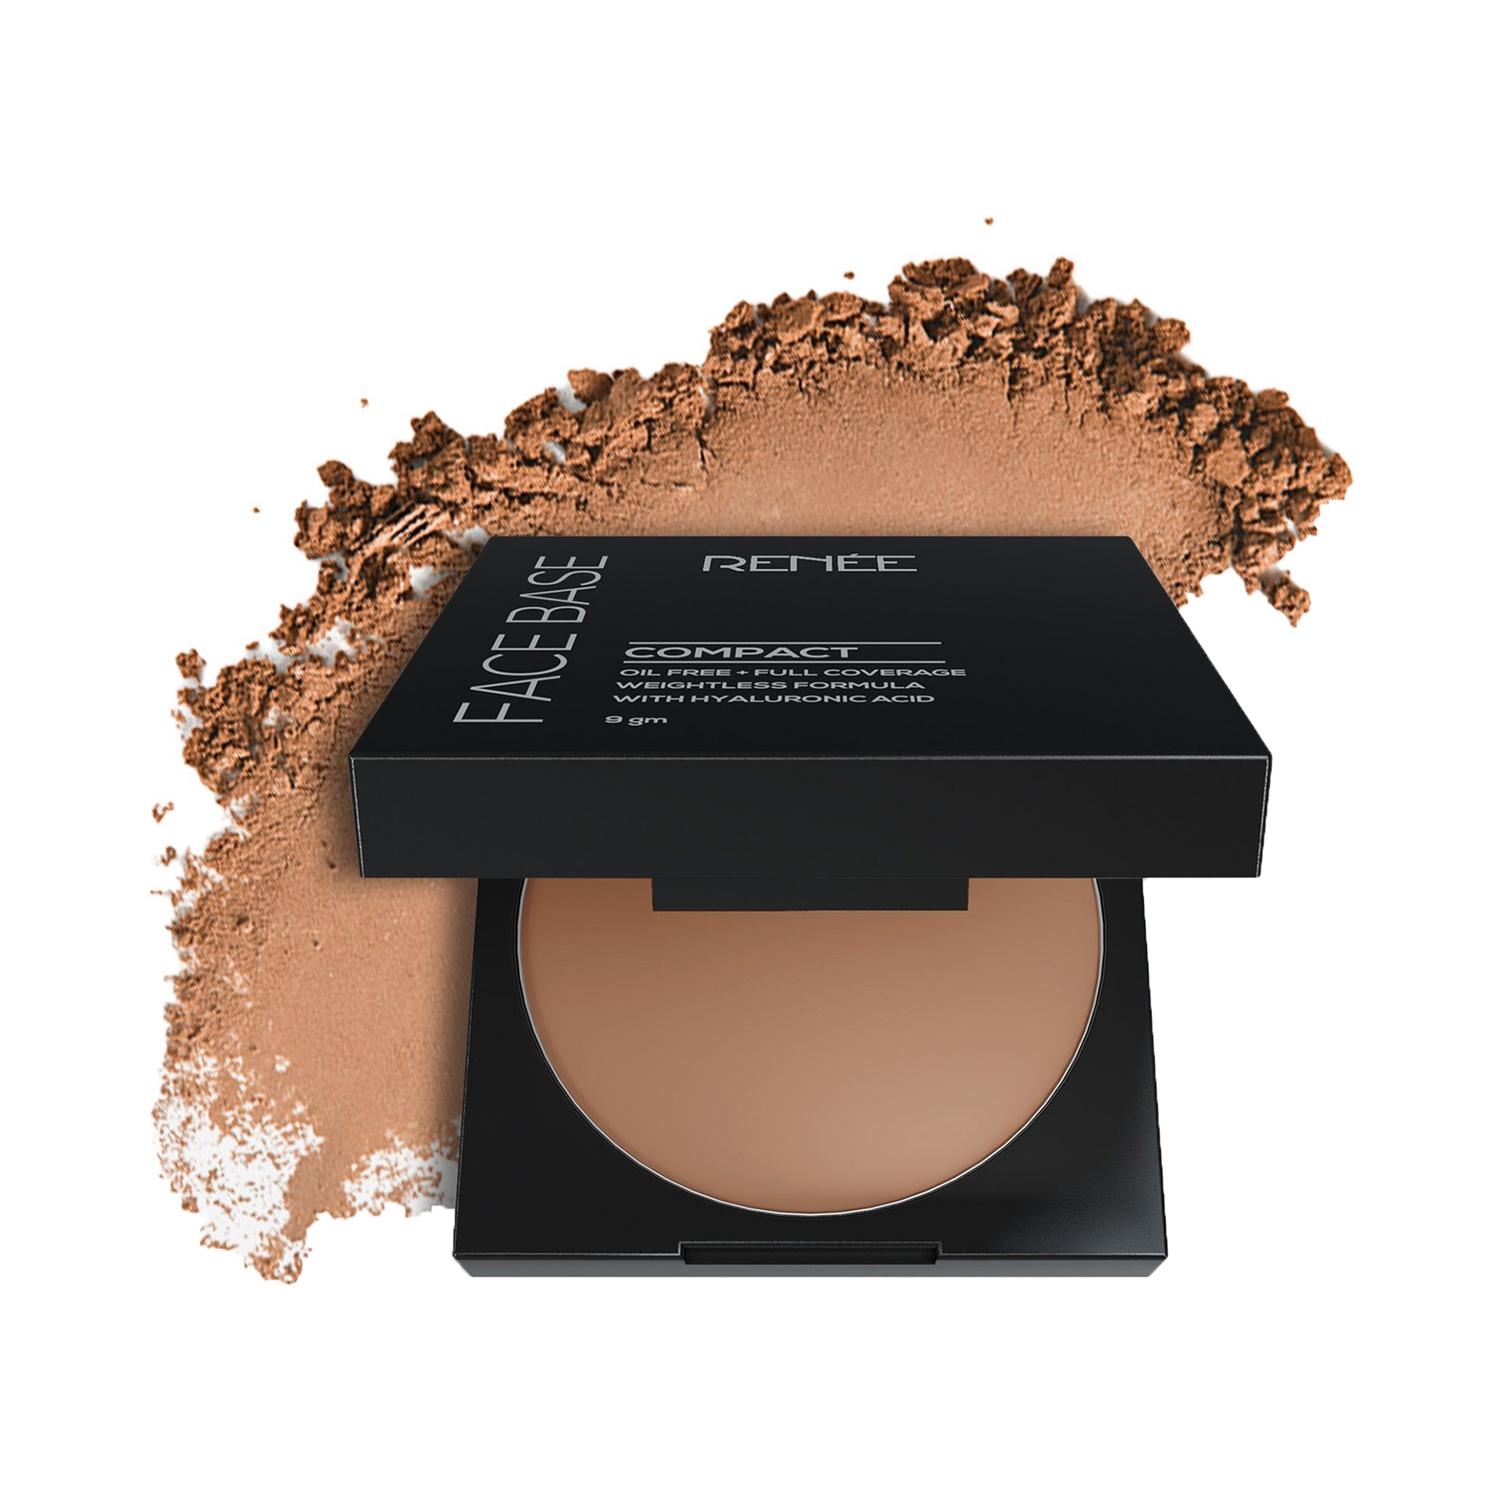 renee face base compact - cocoa beige (9g)